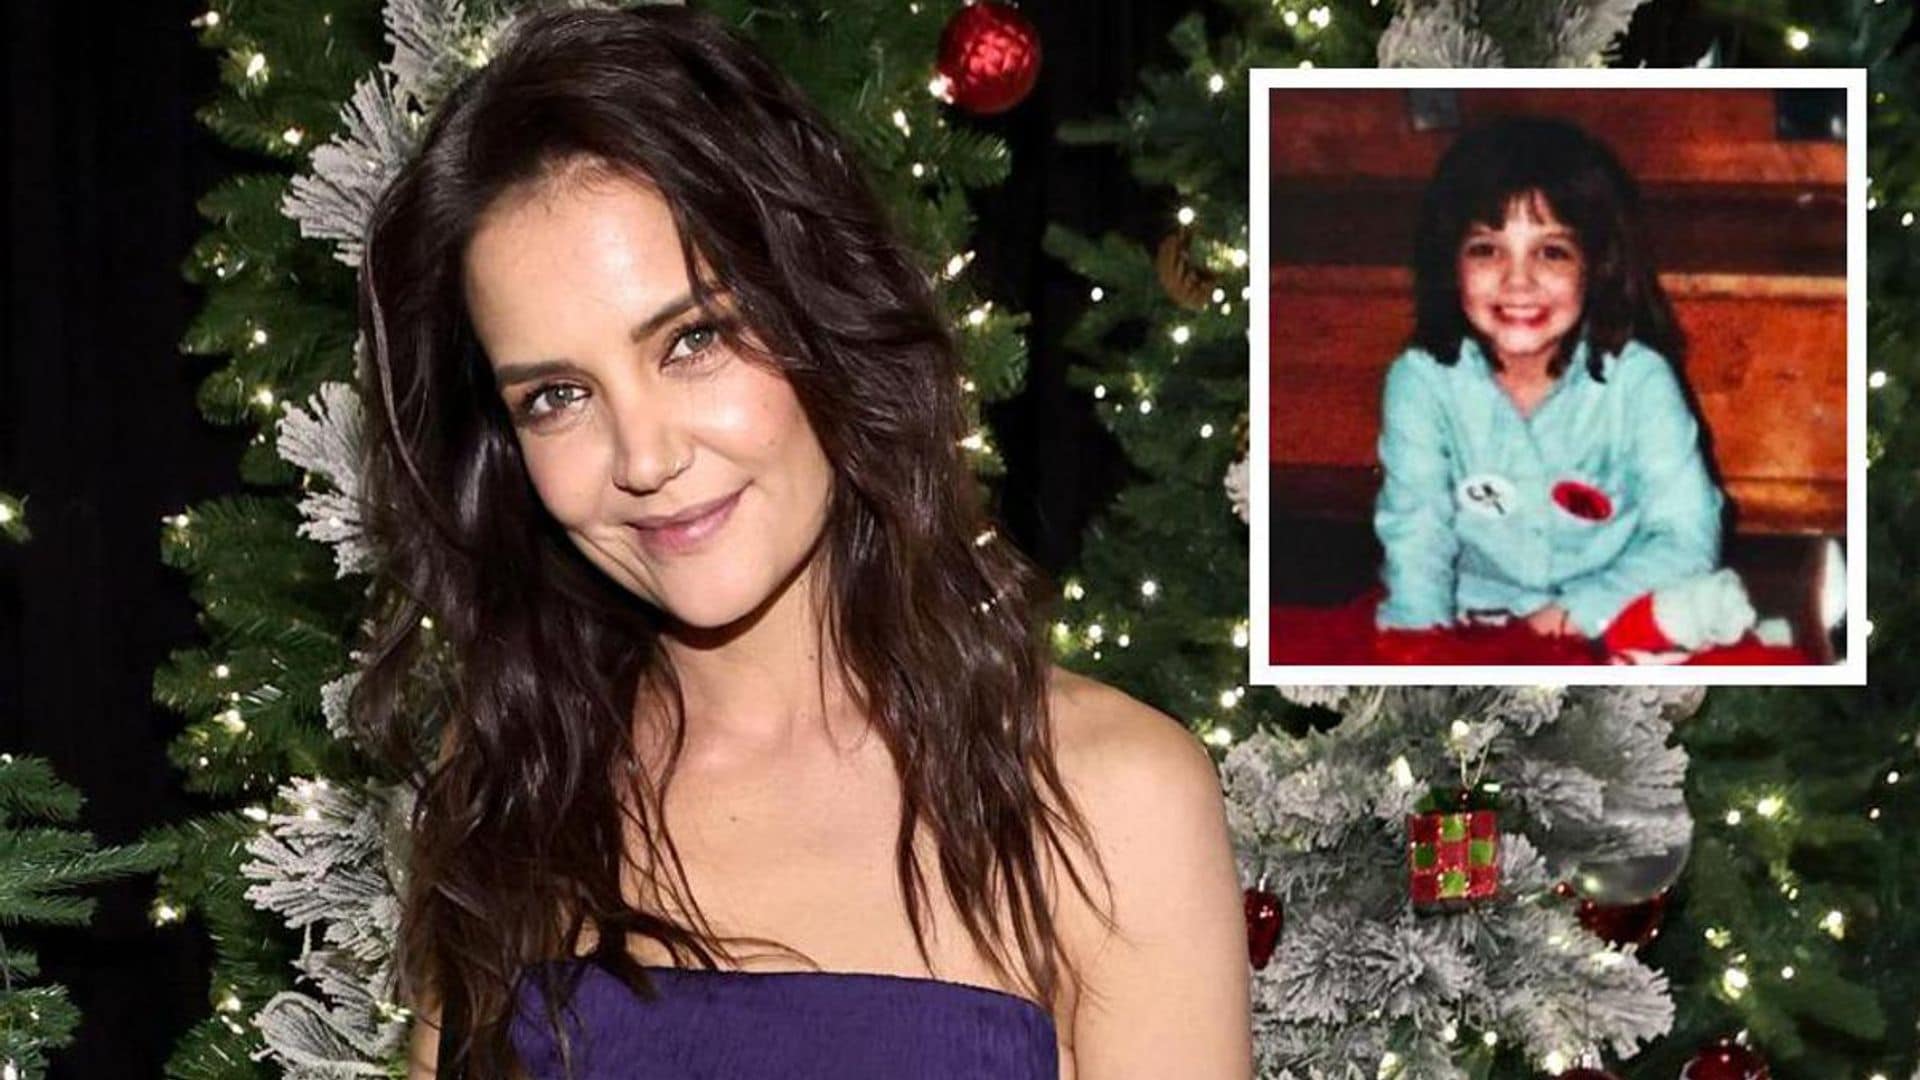 Katie Holmes looks just like Suri Cruise in an adorable throwback